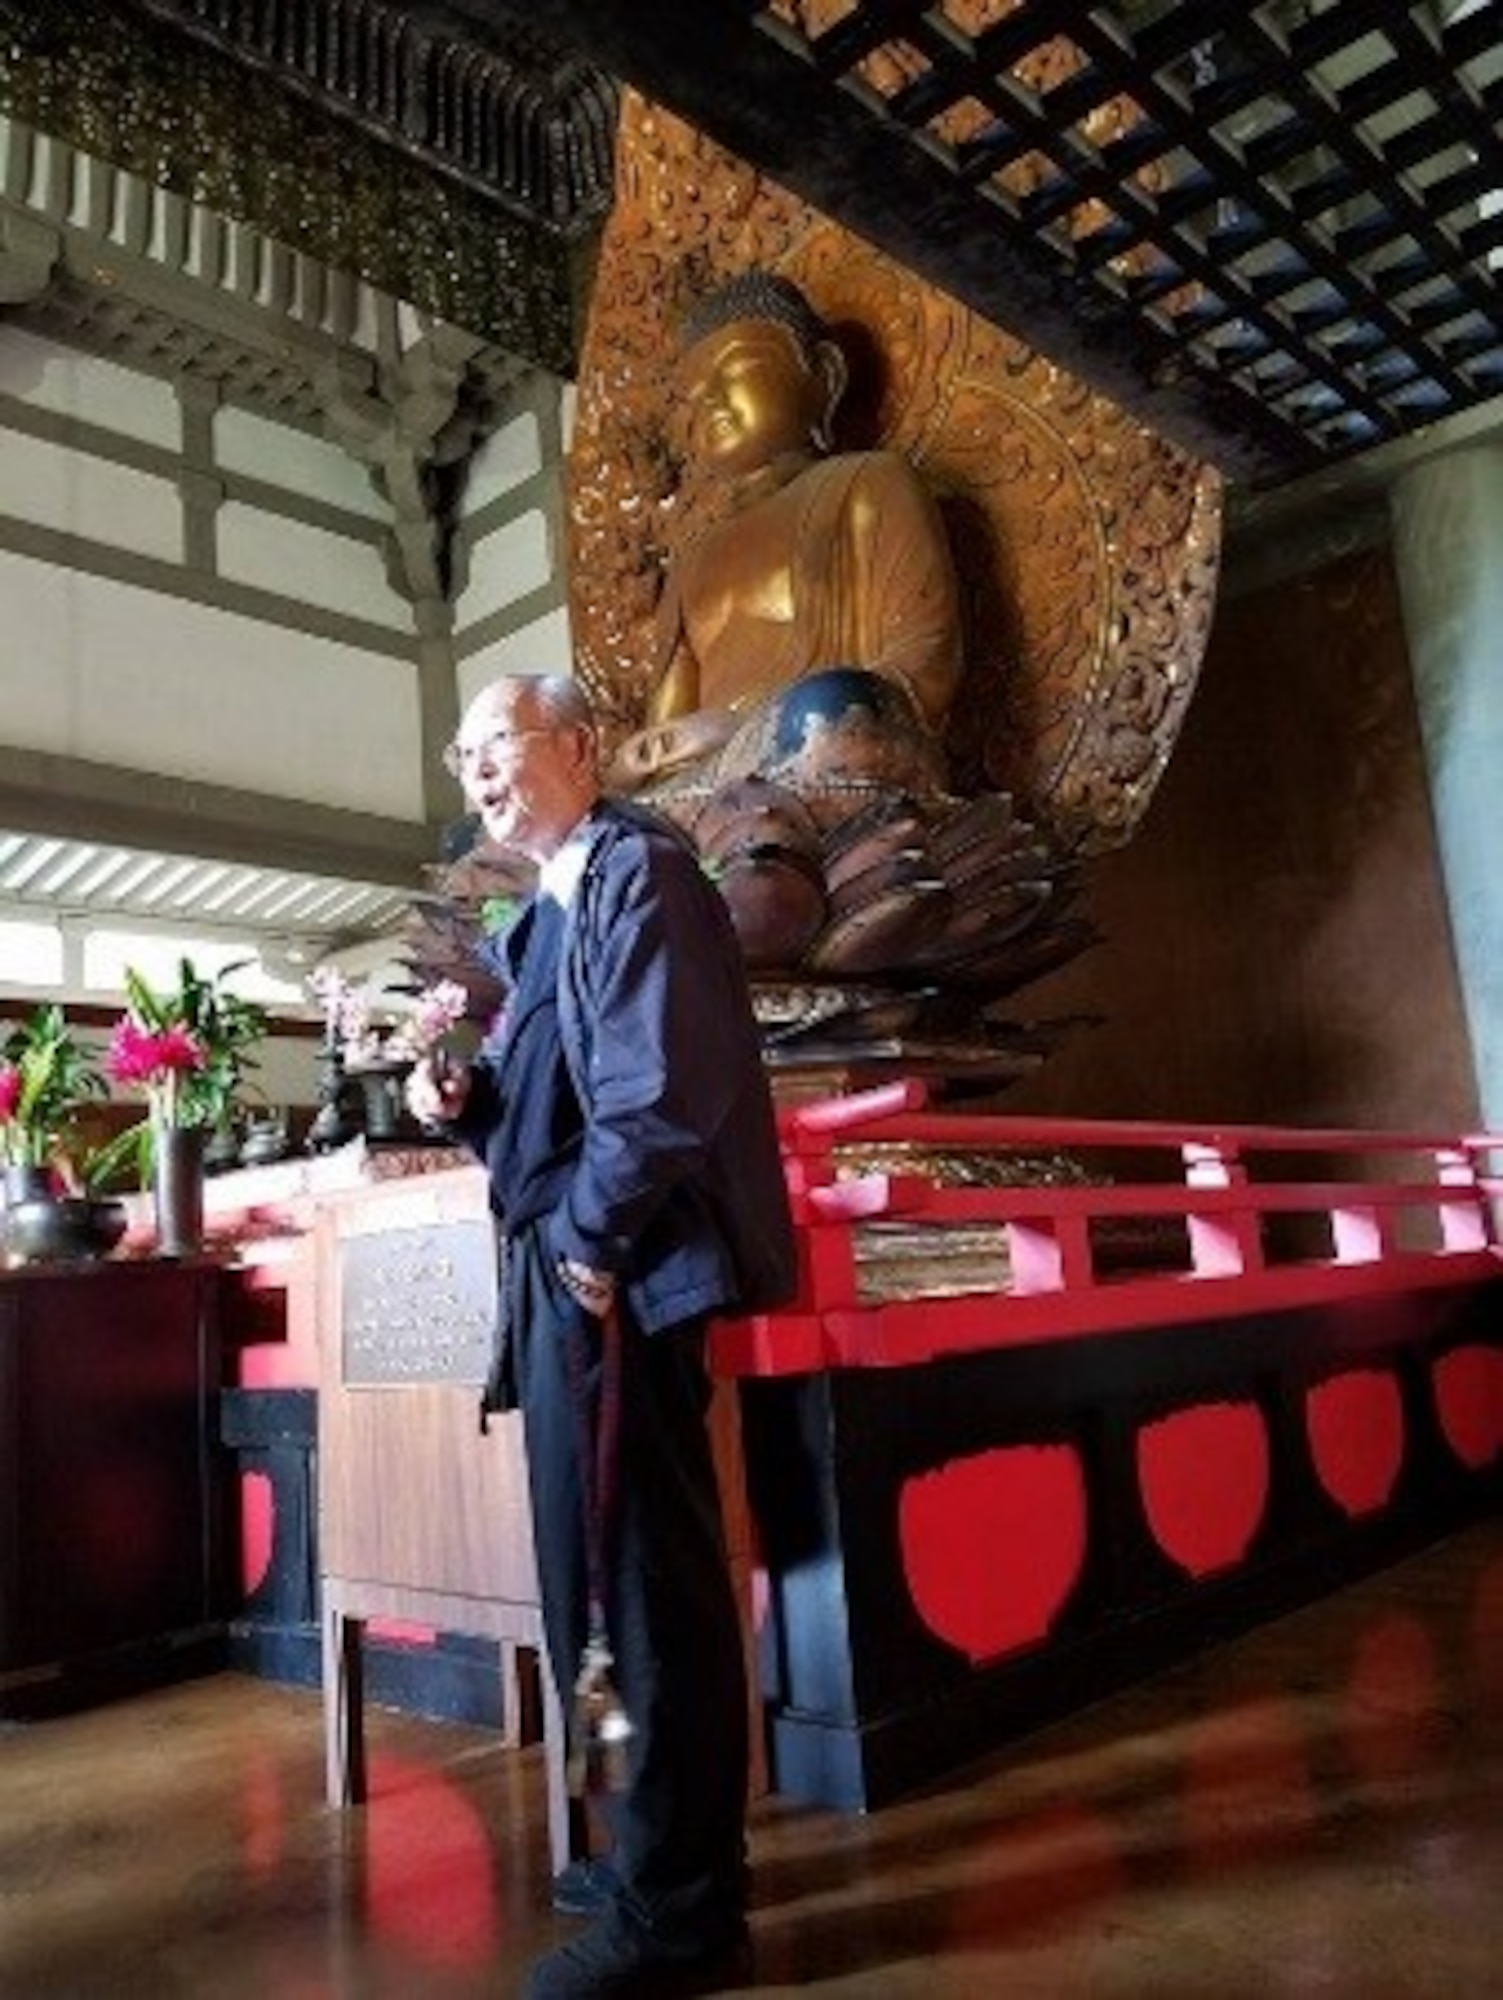 Bishop Fukuhara speaks to the Airmen of the 692nd Intelligence Surveillance Recognizance Group about the Buddhist faith and his personal experiences and spiritual journey in Phoenix Hall of the Byodo-in Temple. (Courtesy photo by Chaplain (Capt.) Ryan Ayers)